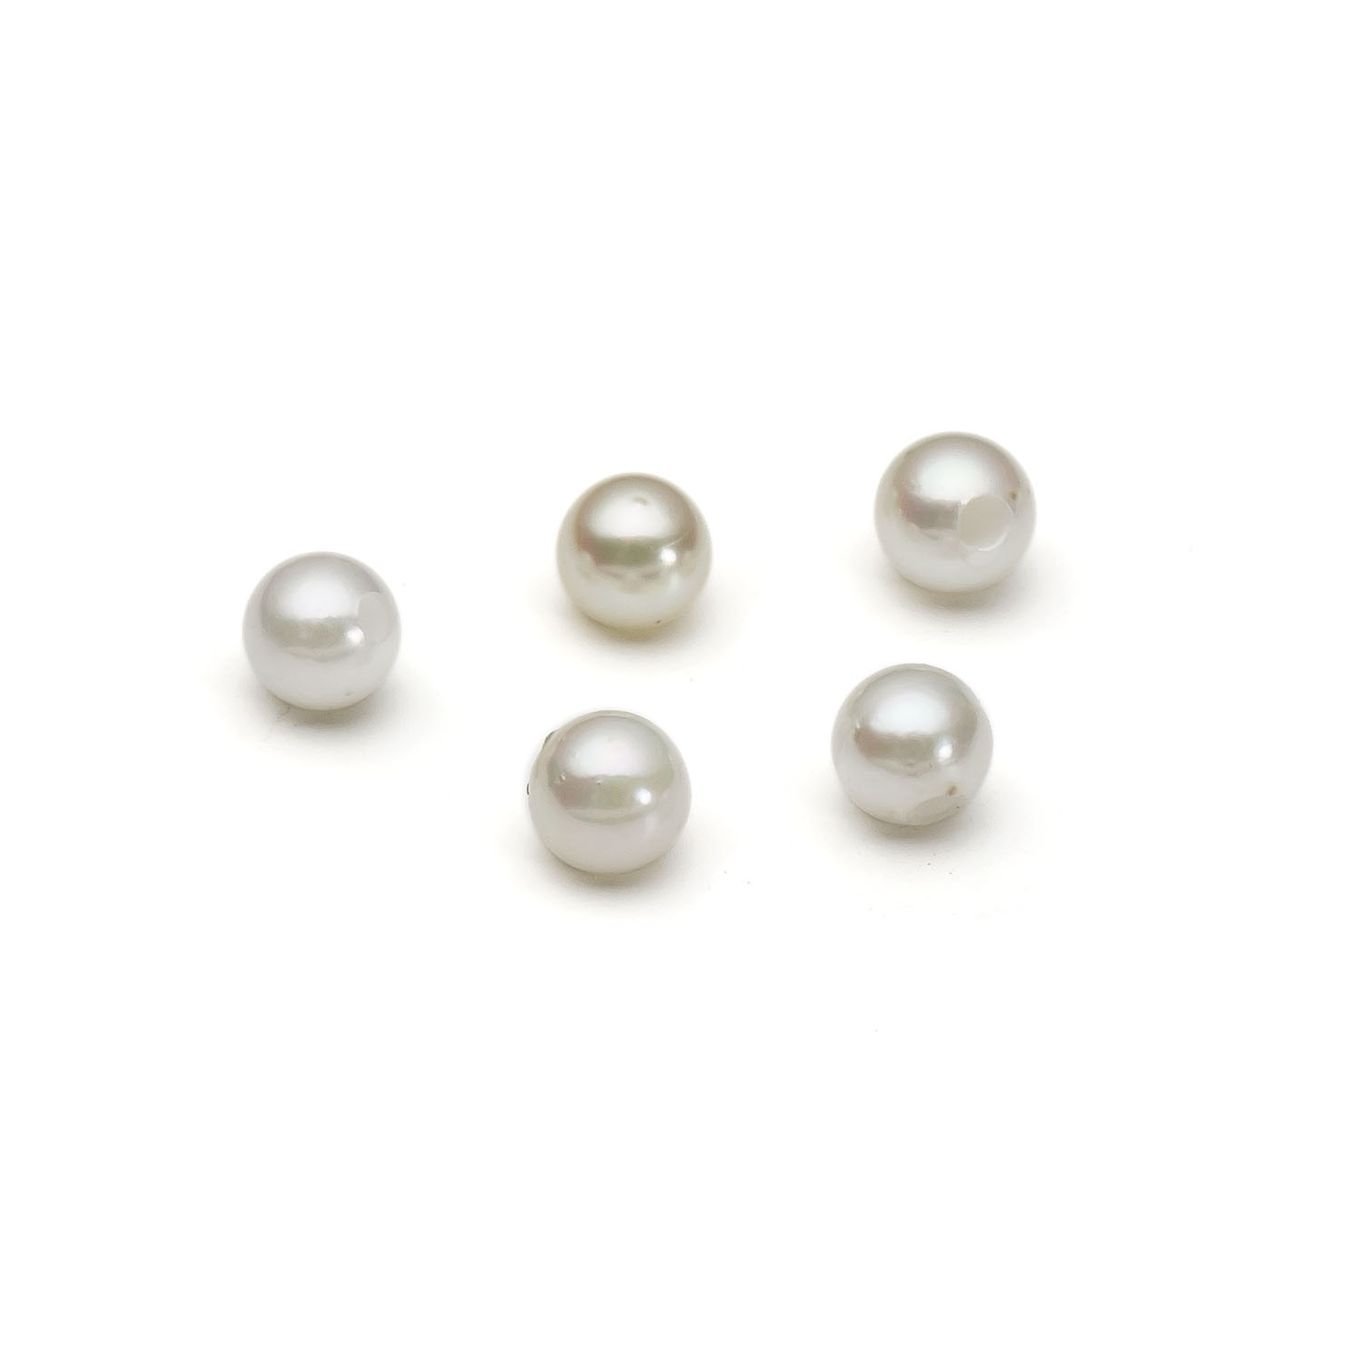 round pearls, half drilled, 2-3mm pearls, white freshwater pearls, loose  pearl beads, for stud earrings